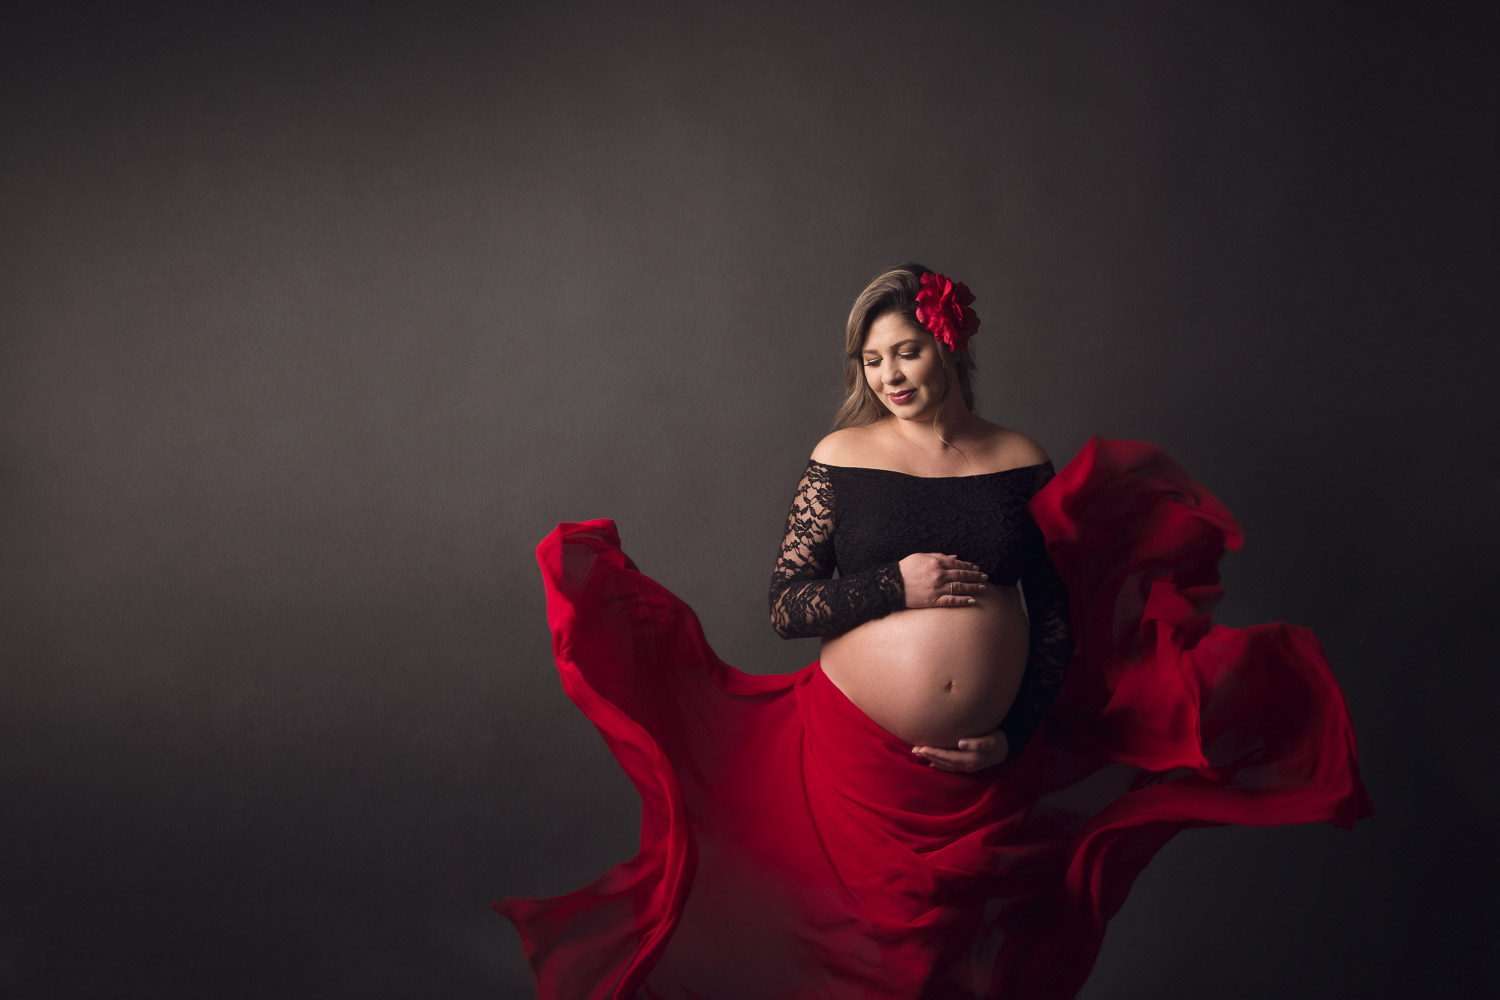 unique maternity photography ideas with poses and pictures